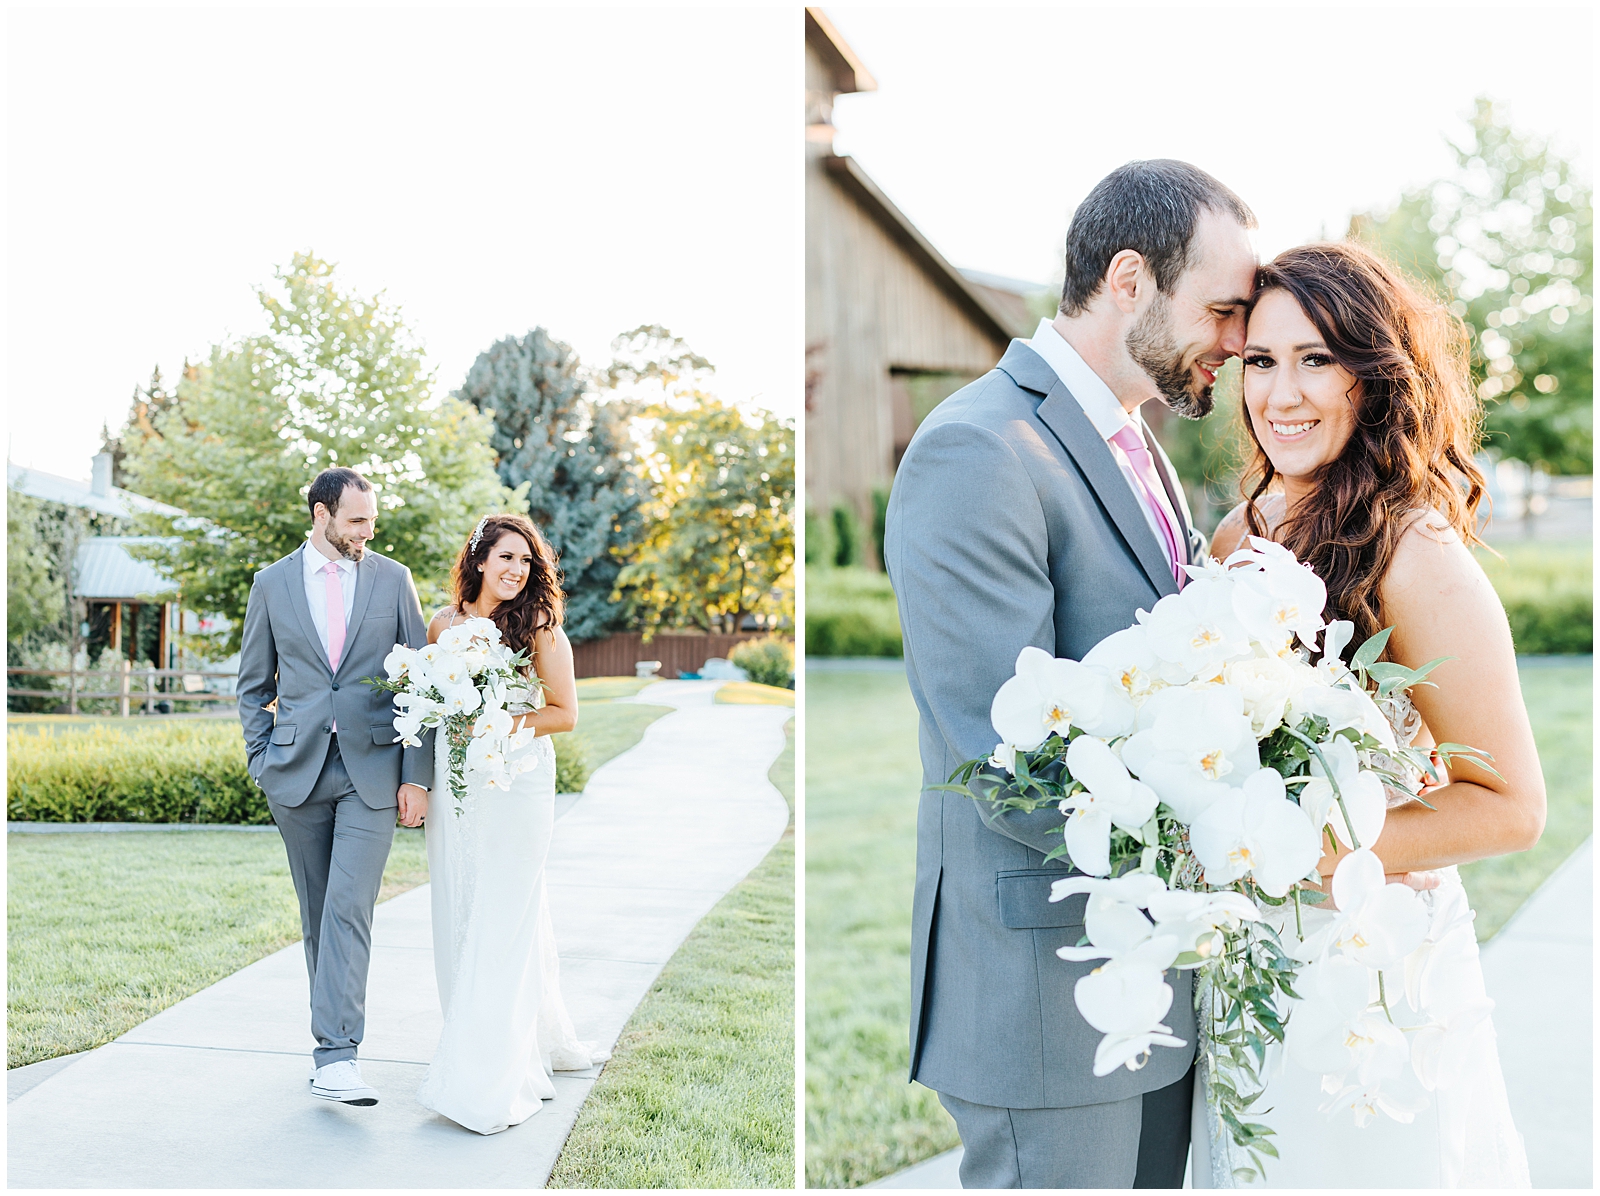 Golden Hour Portraits with the Bride and Groom at Summer Still Water Hollow Wedding